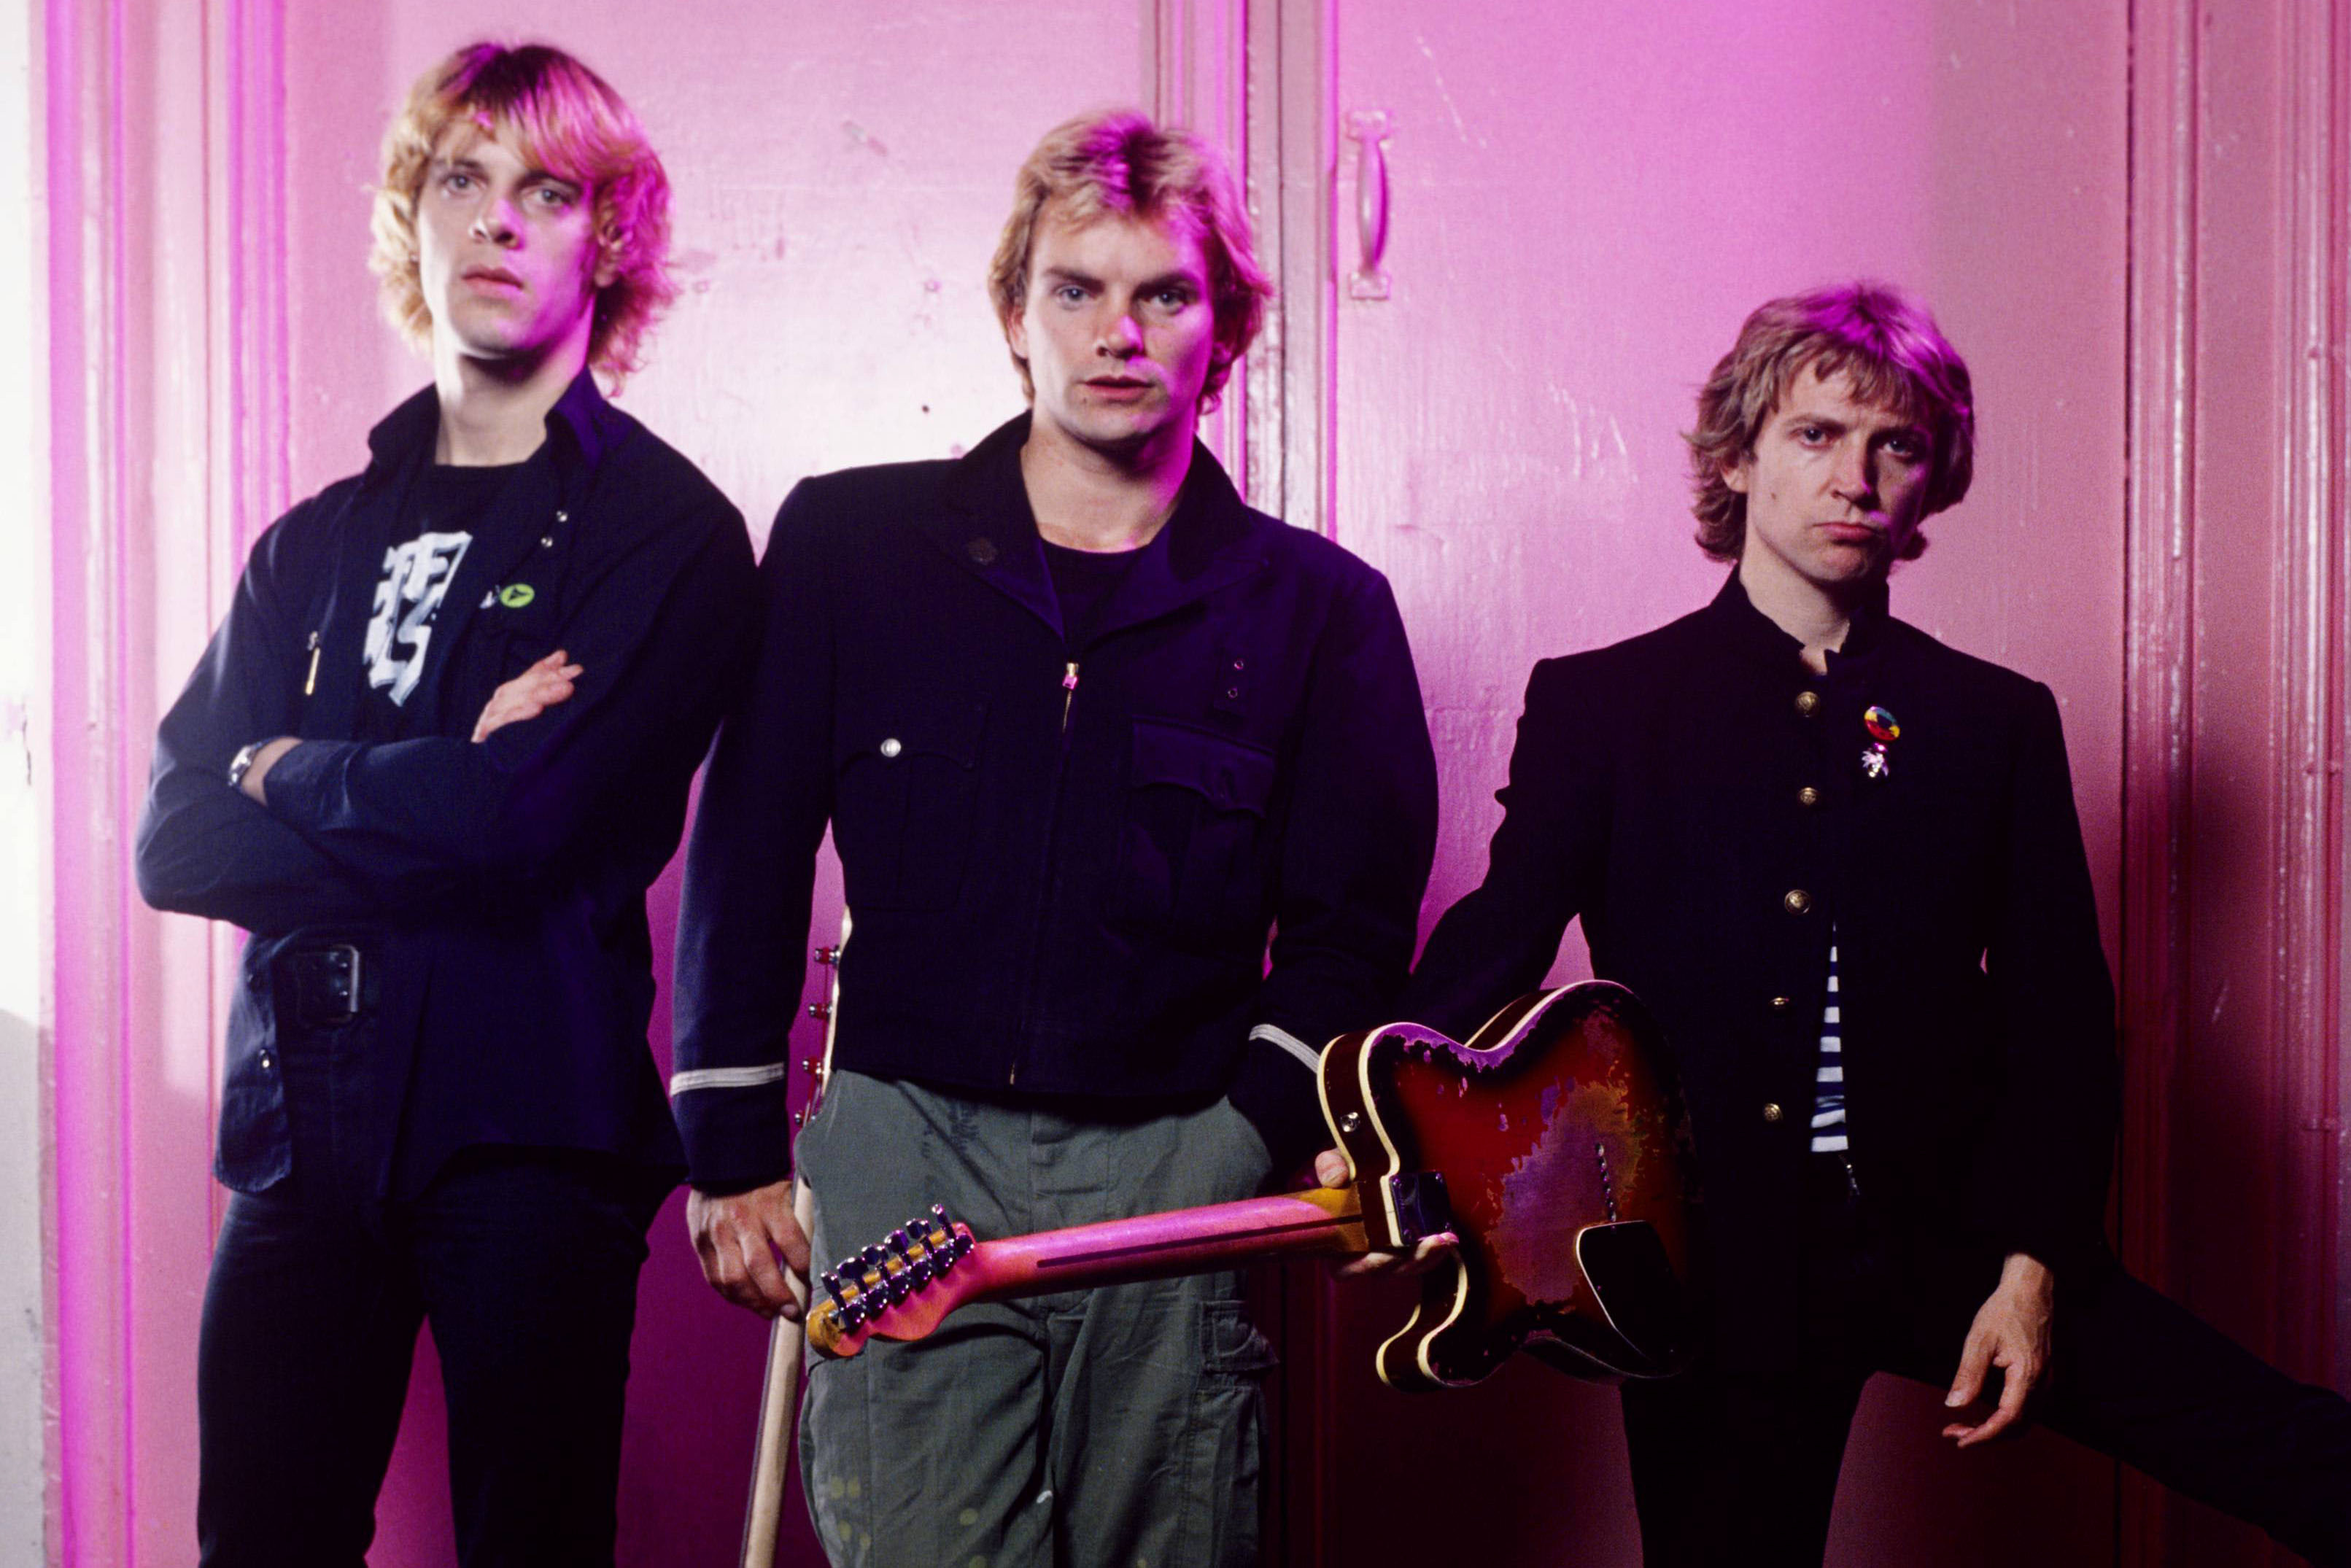 Rock band The Police.